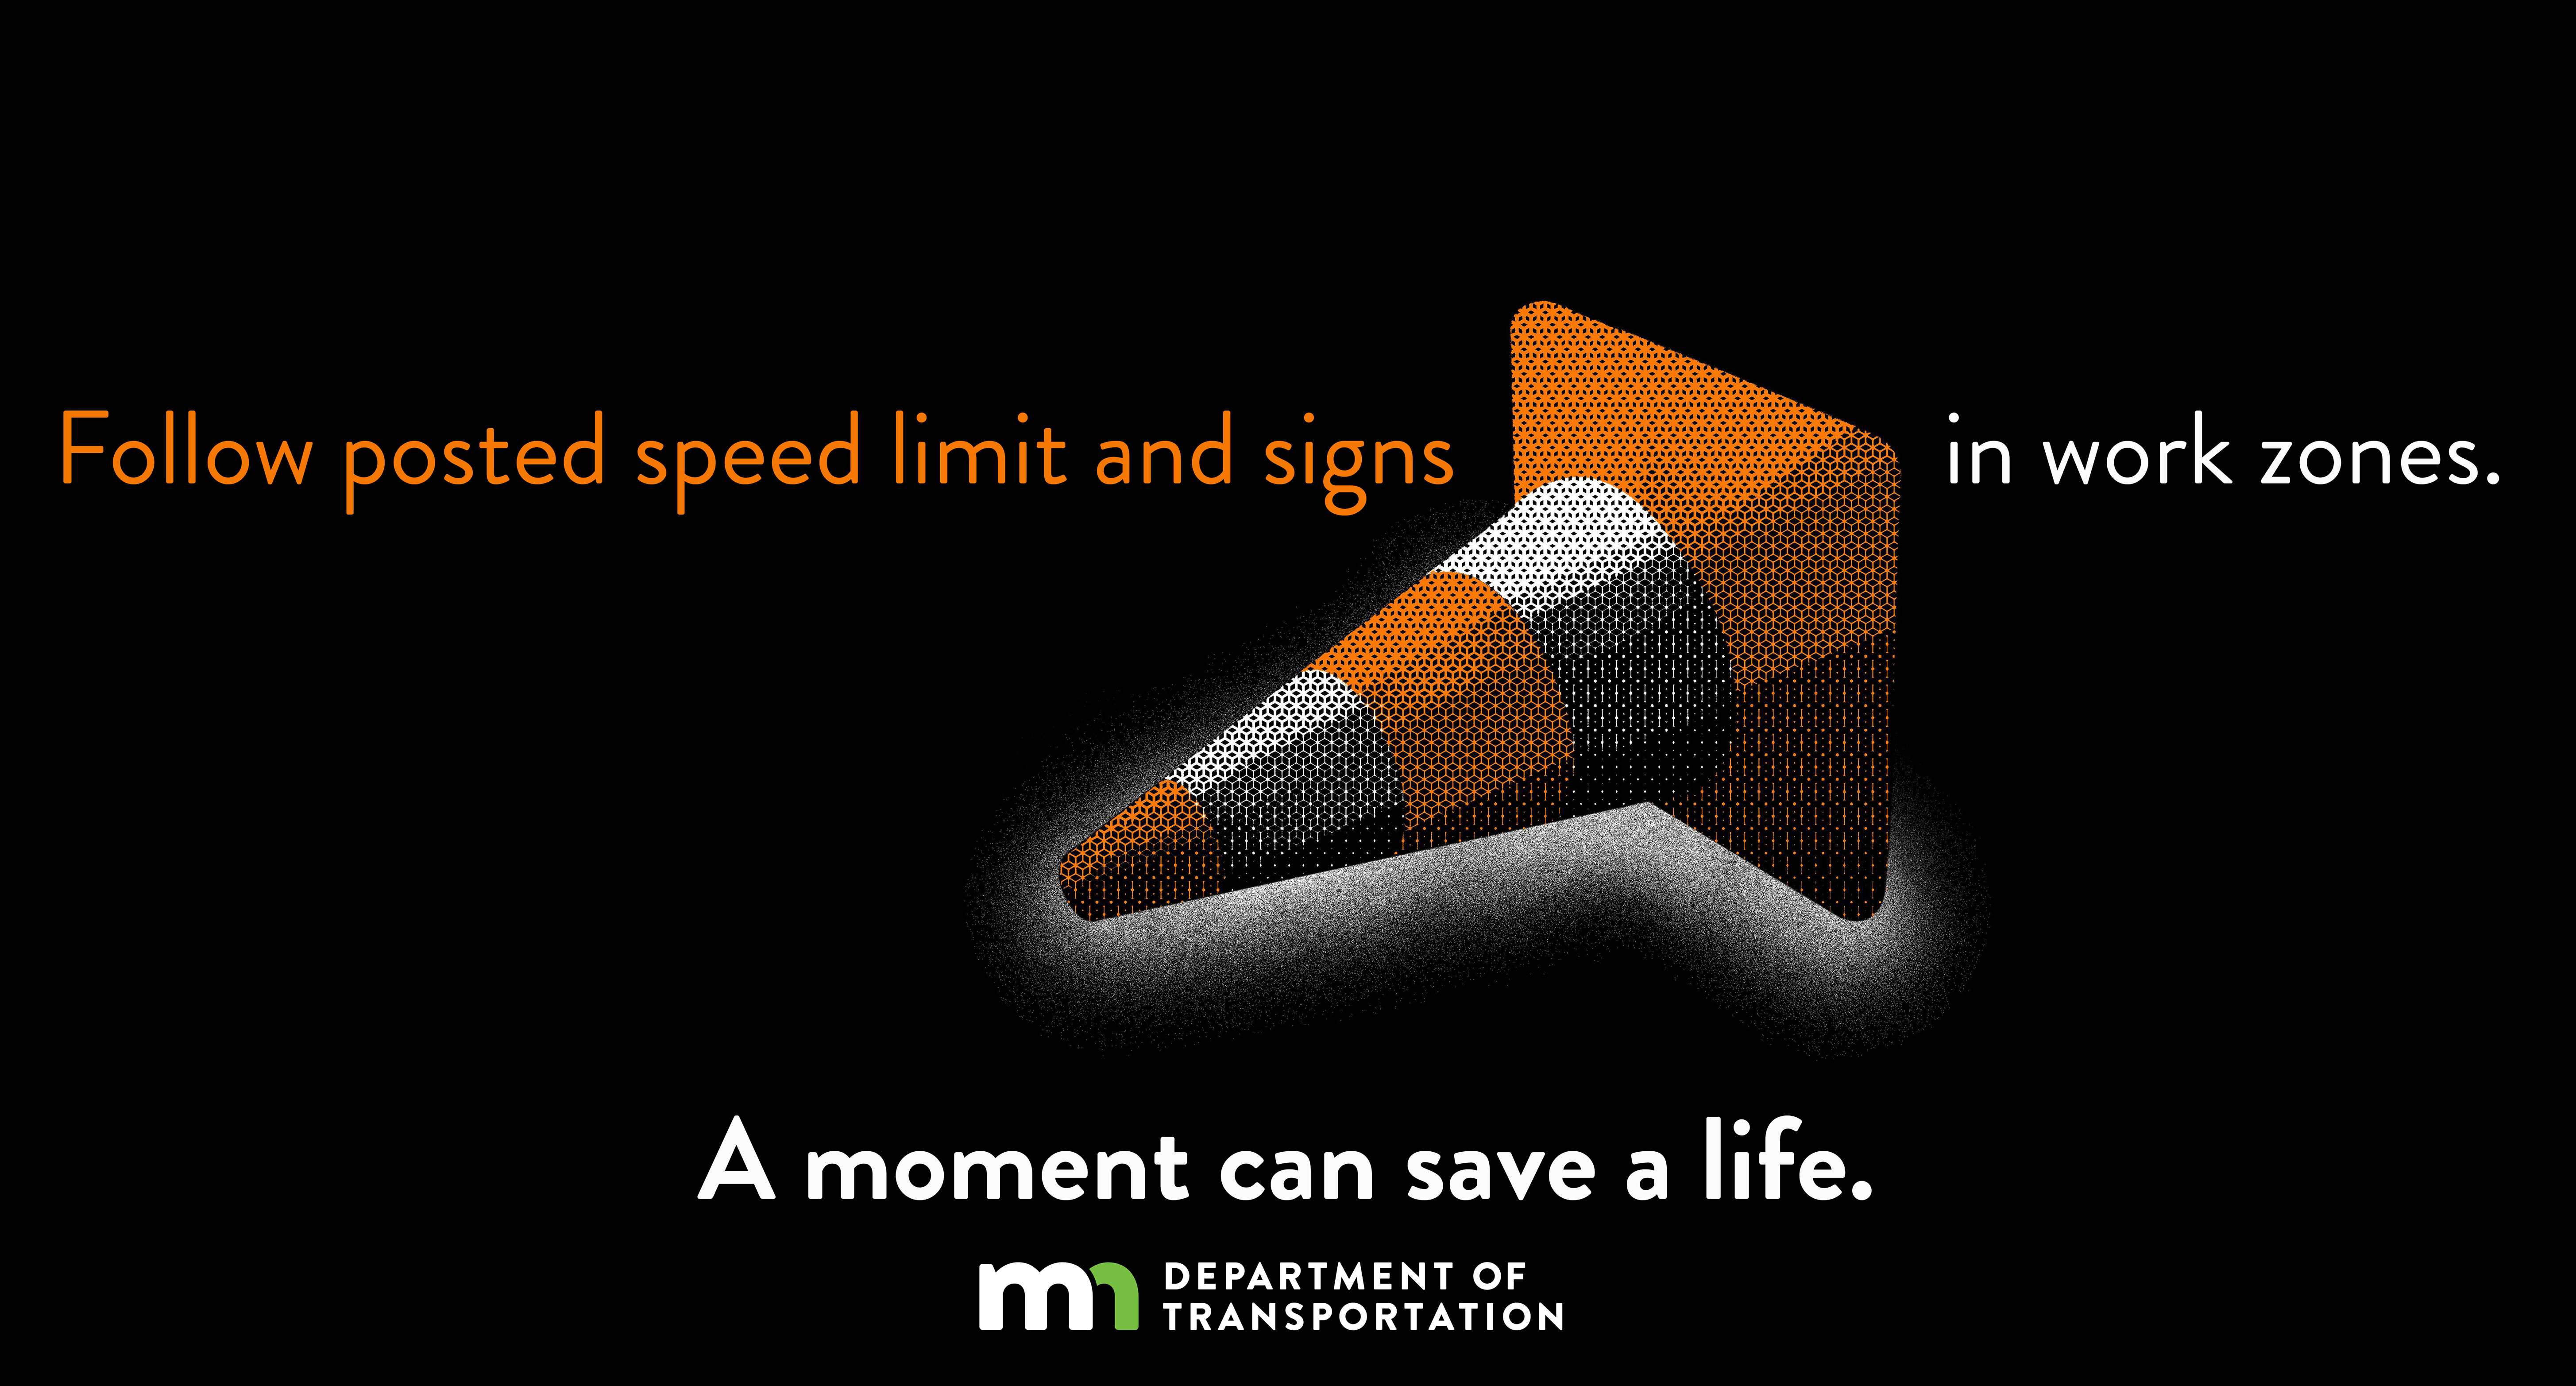 Follow posted speed limit signs in work zones. A moment can save a life.